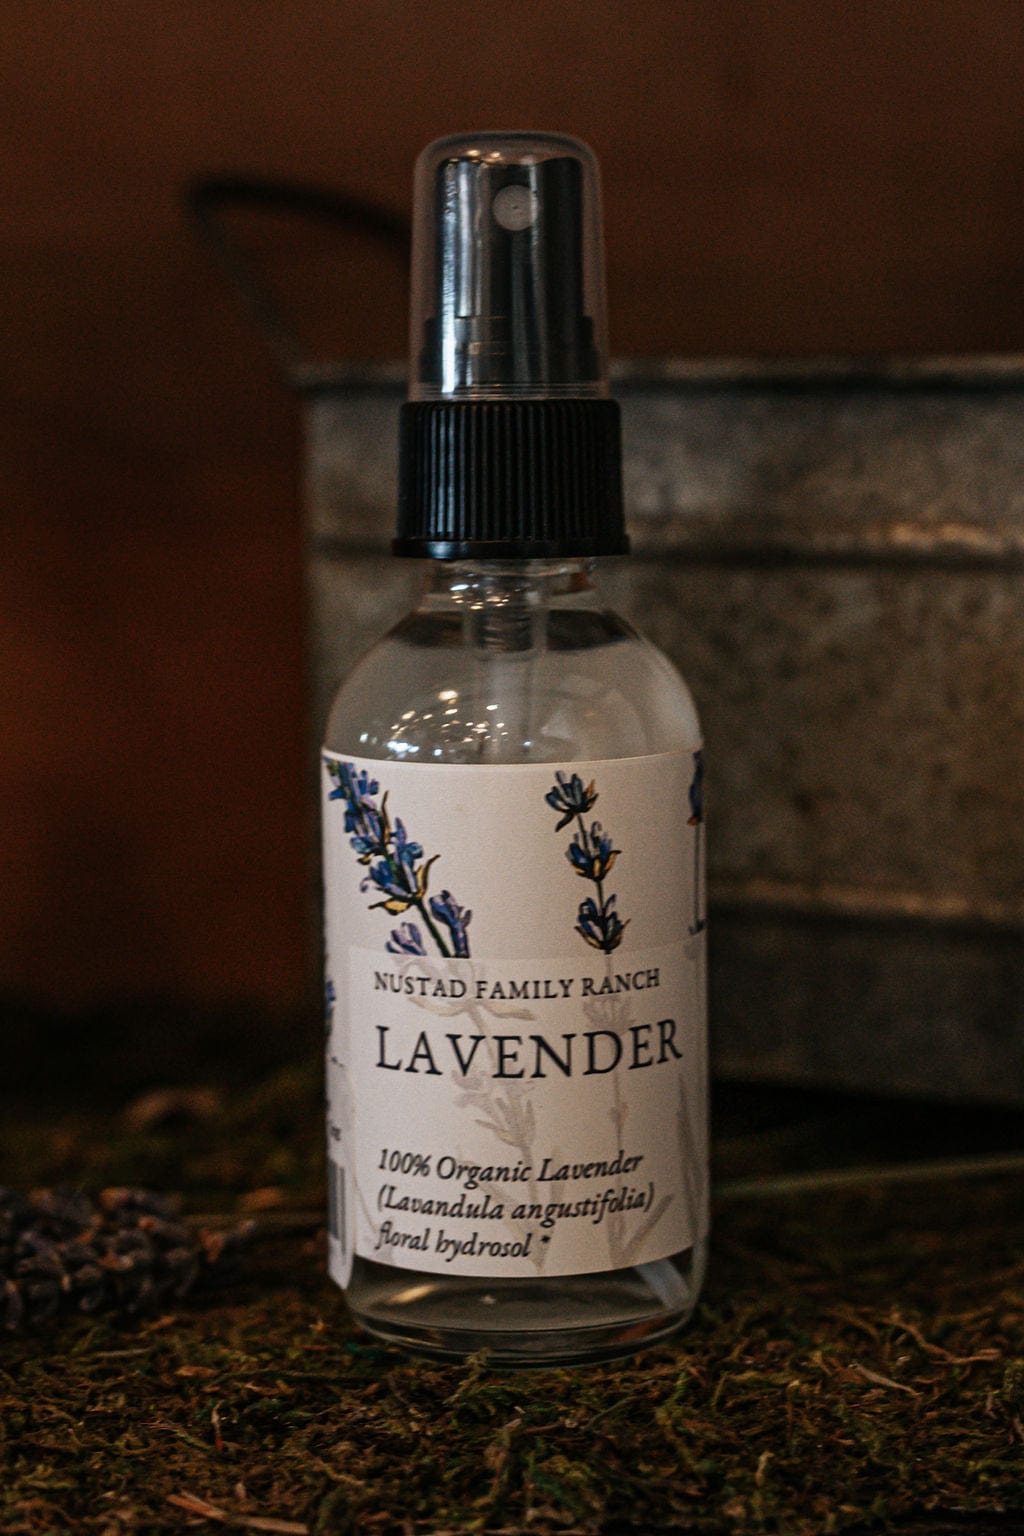 Nustad Family Ranch Personal Care Lavender Hydrosol